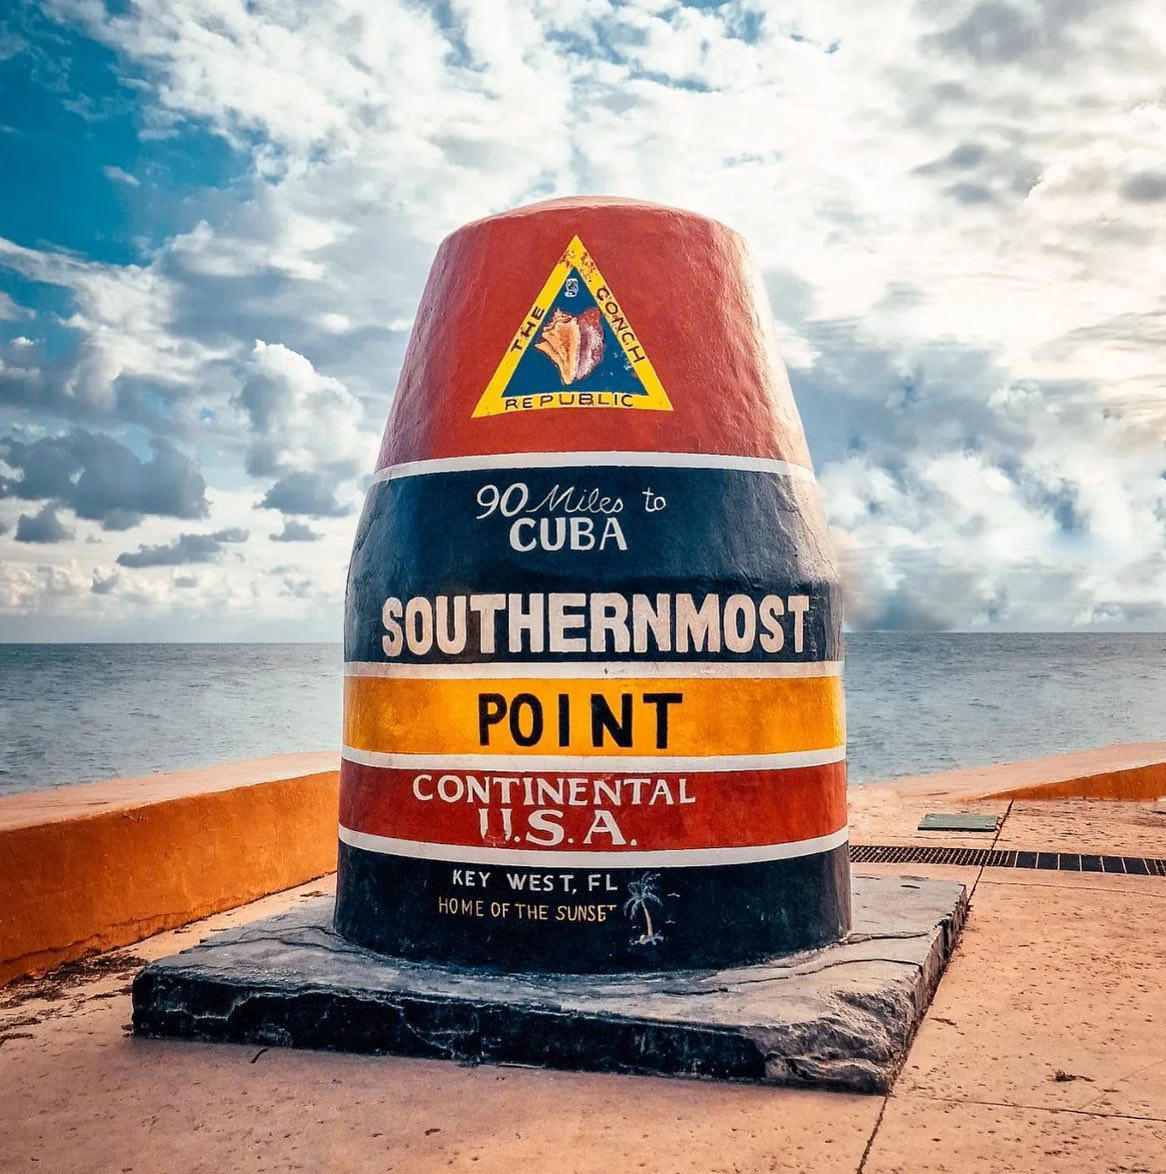 Happy Saturday from the southernmost point